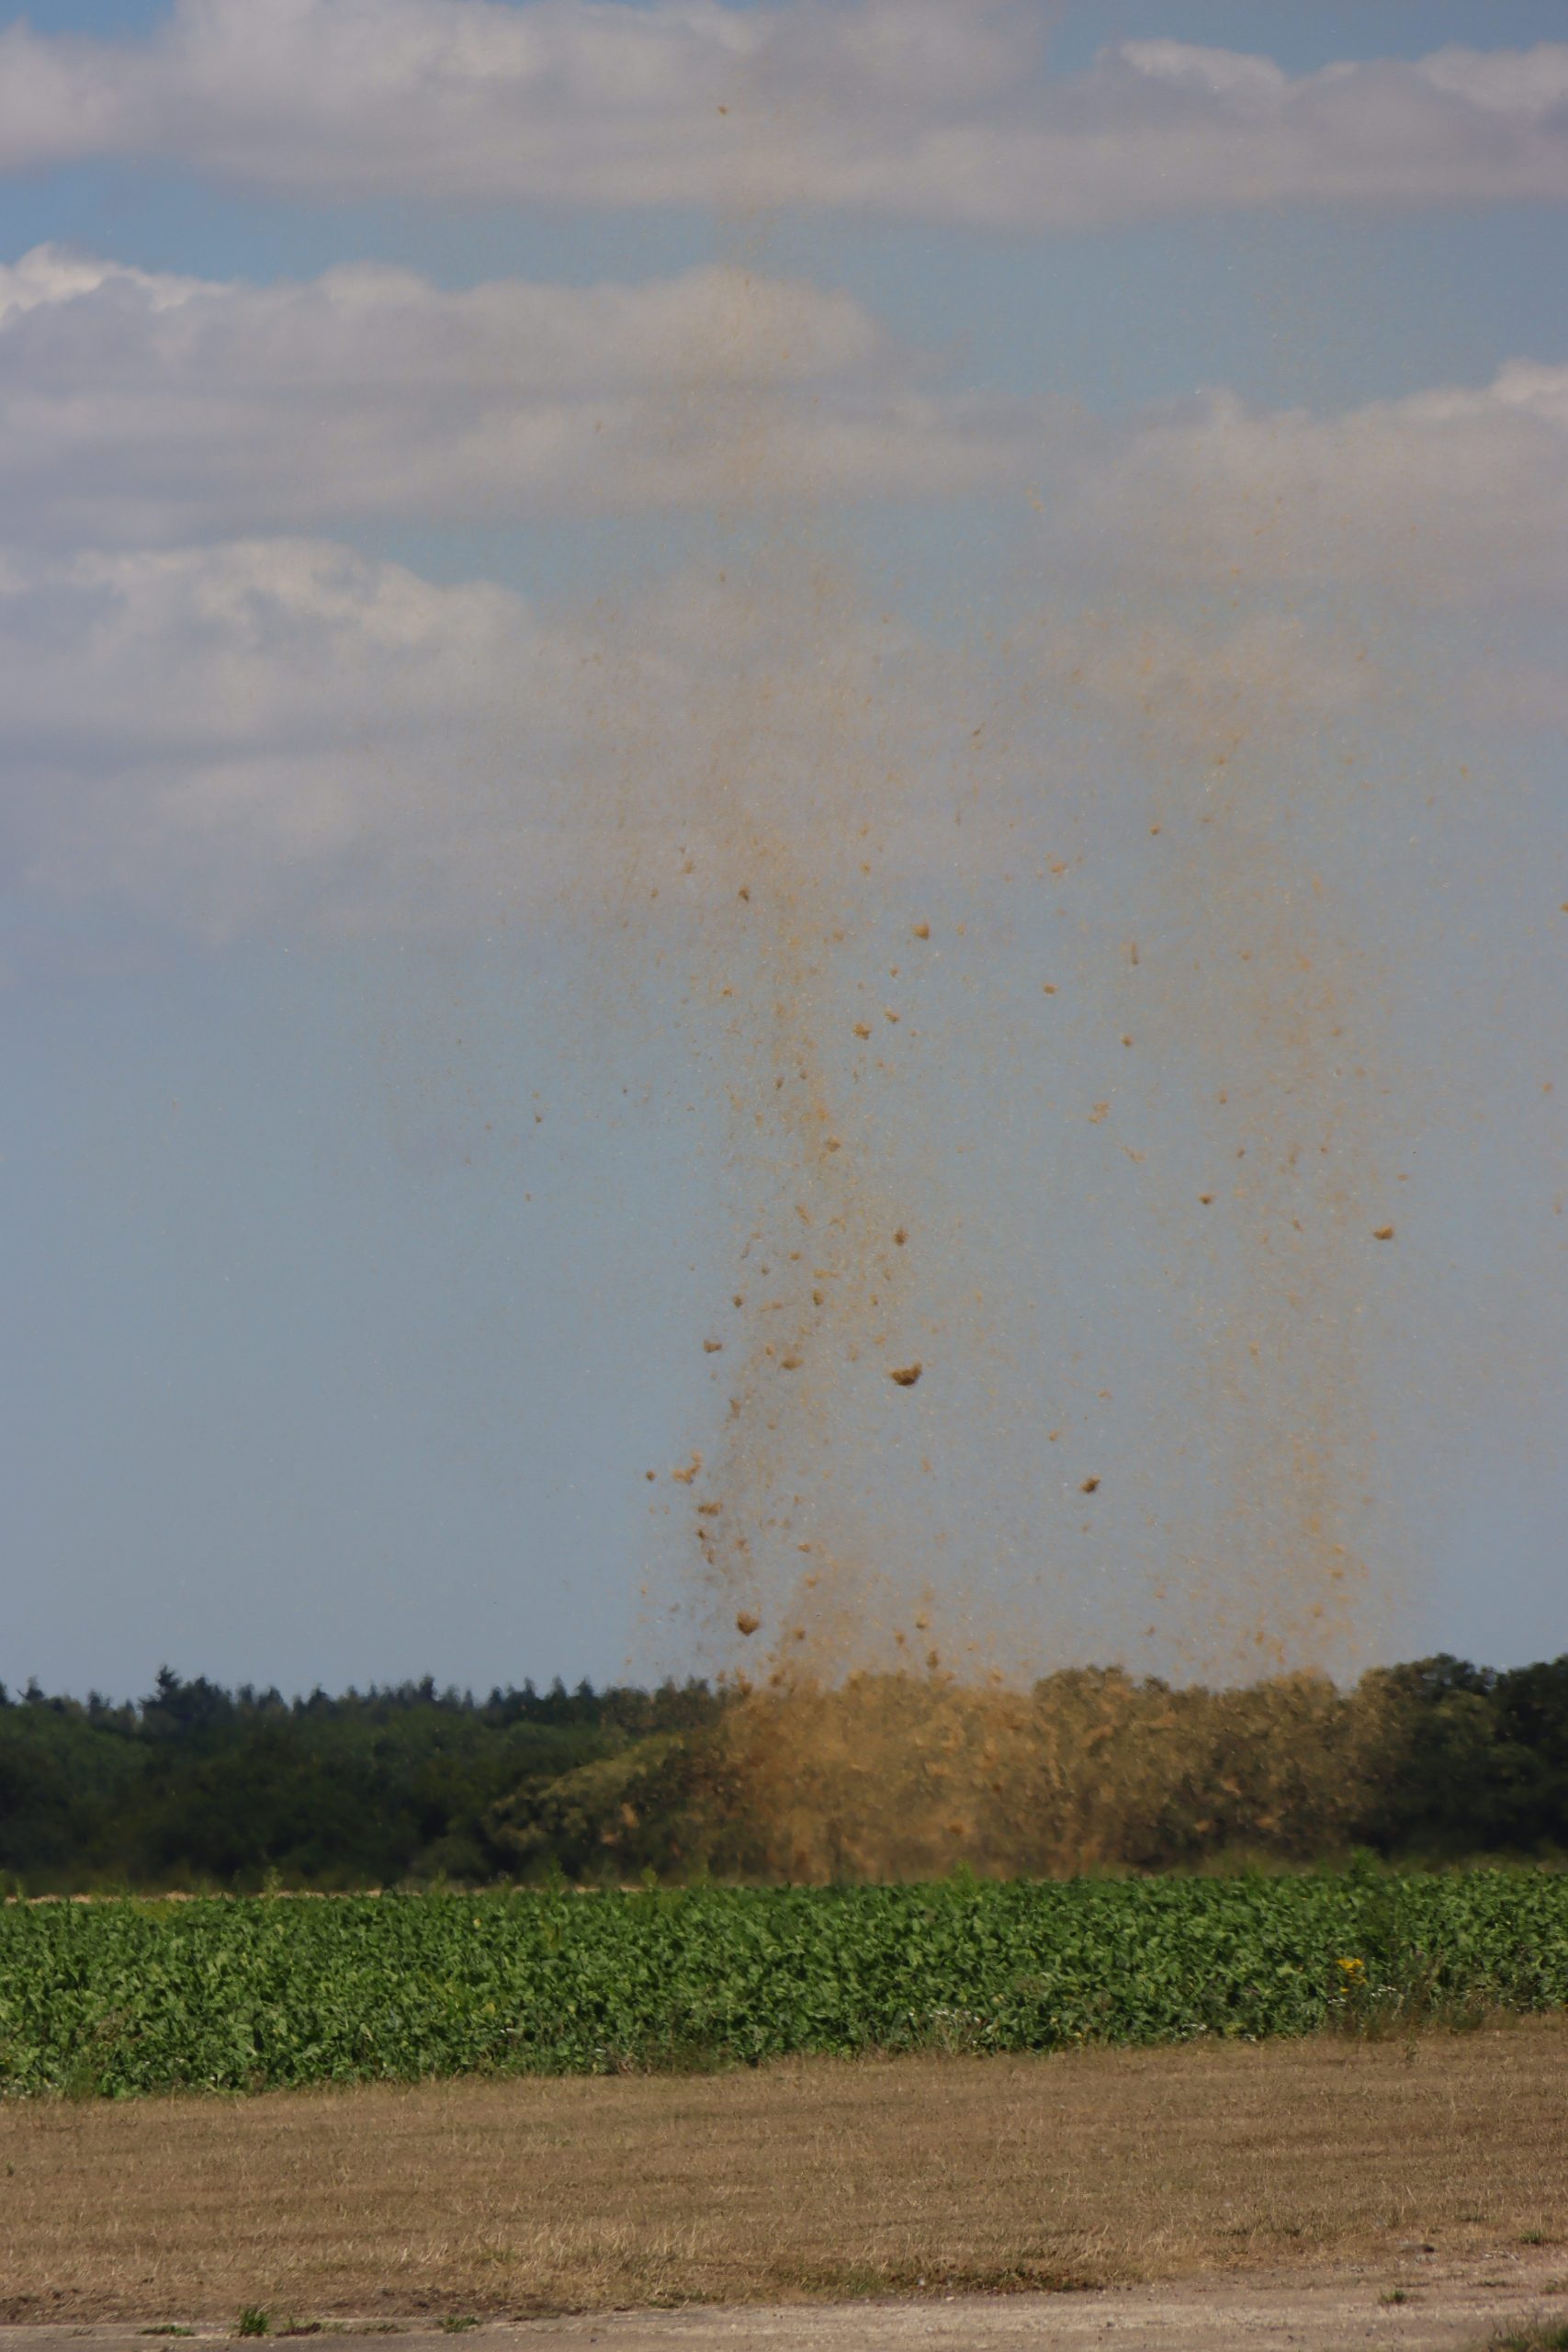 Dust Devil on YouTube by Kevin Fairgrieve